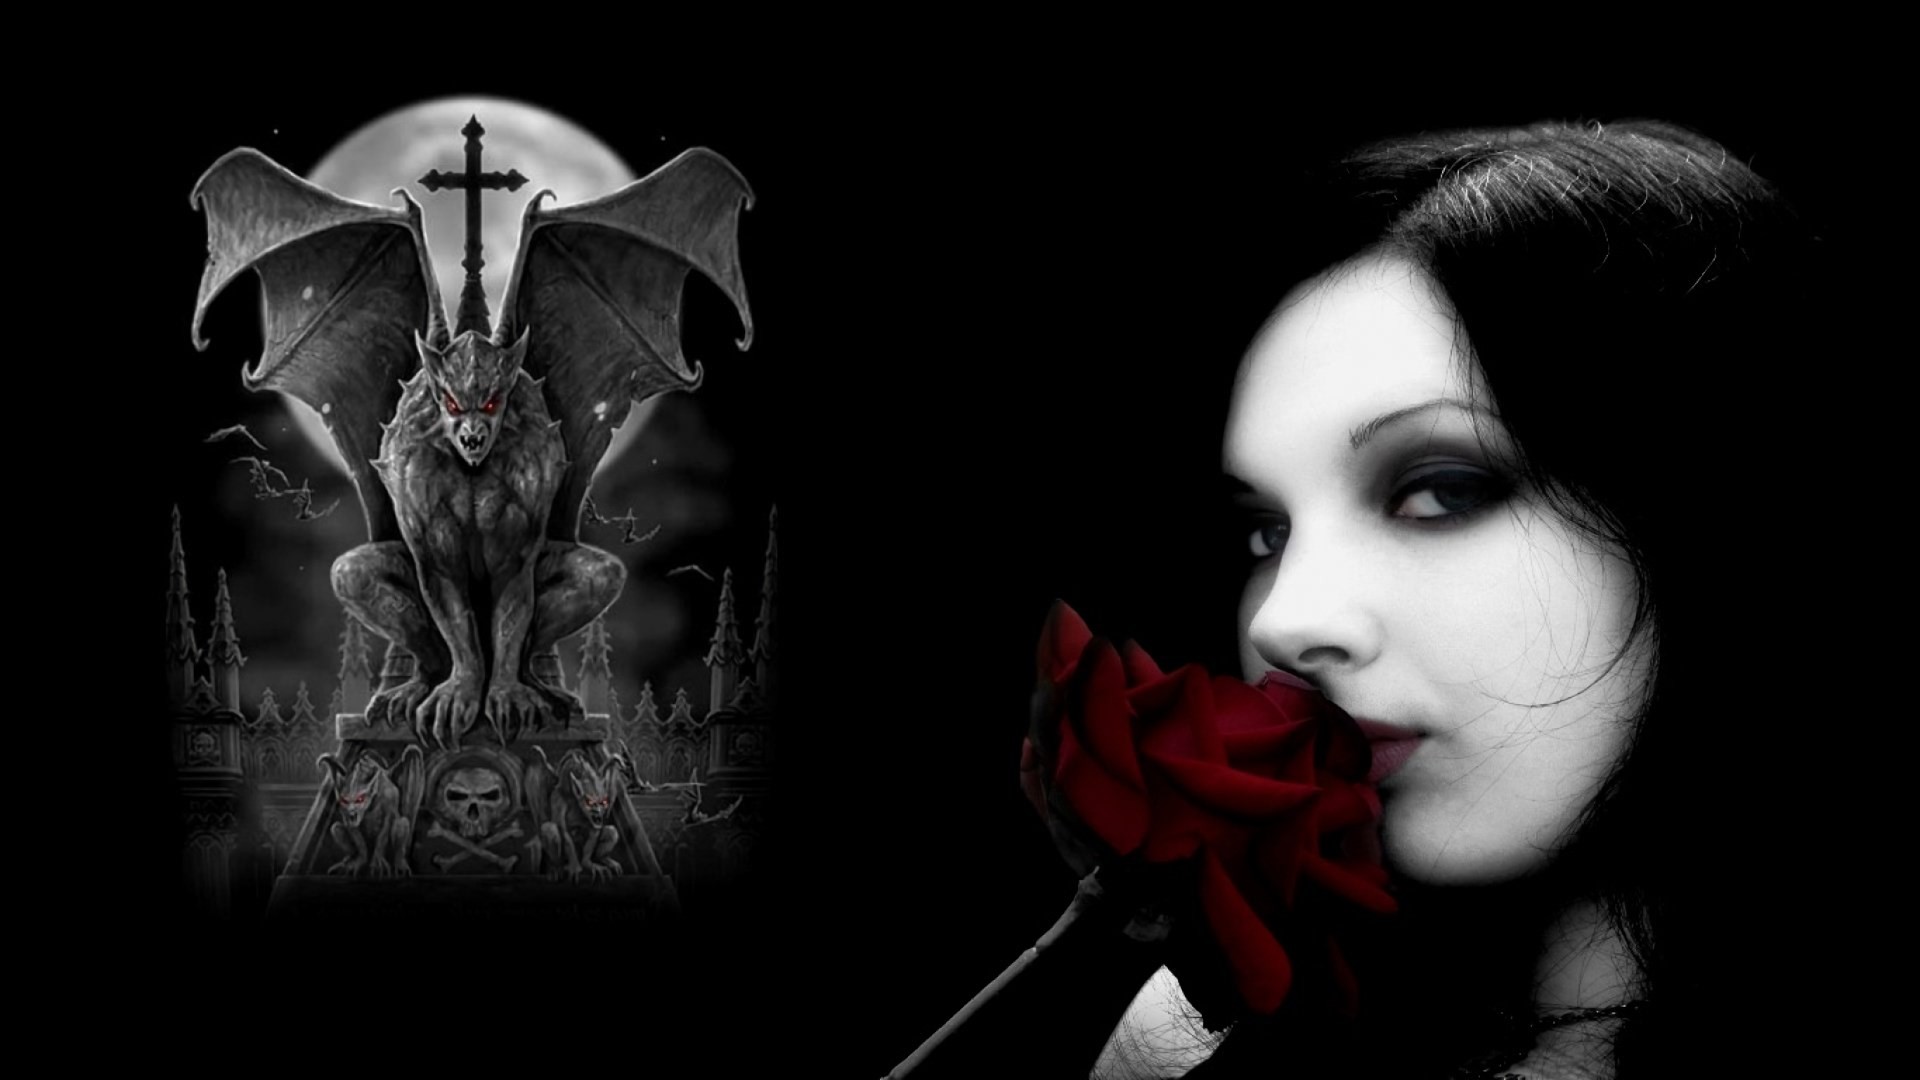 gothic wallpaper for walls,goth subculture,darkness,lip,gothic fashion,fictional character